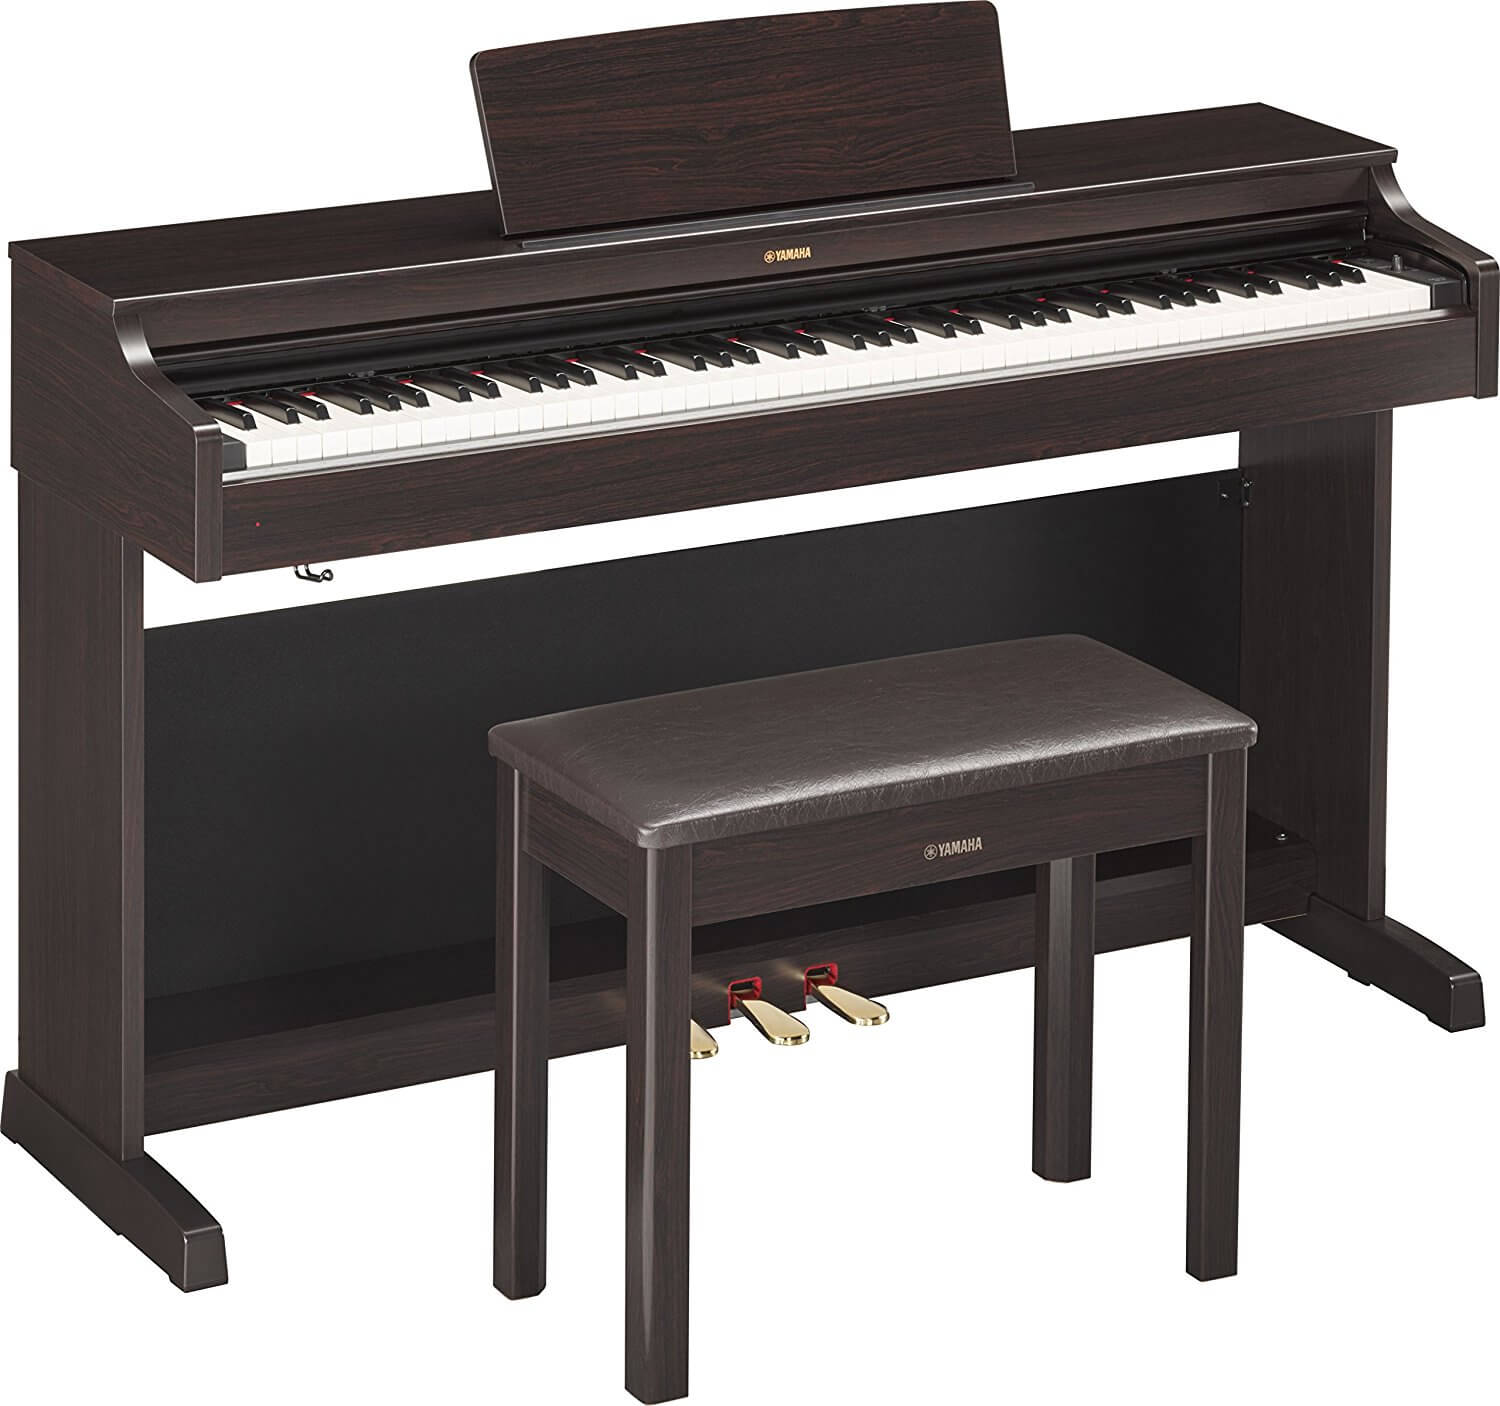 All About Yamaha Pianos History and Model Range